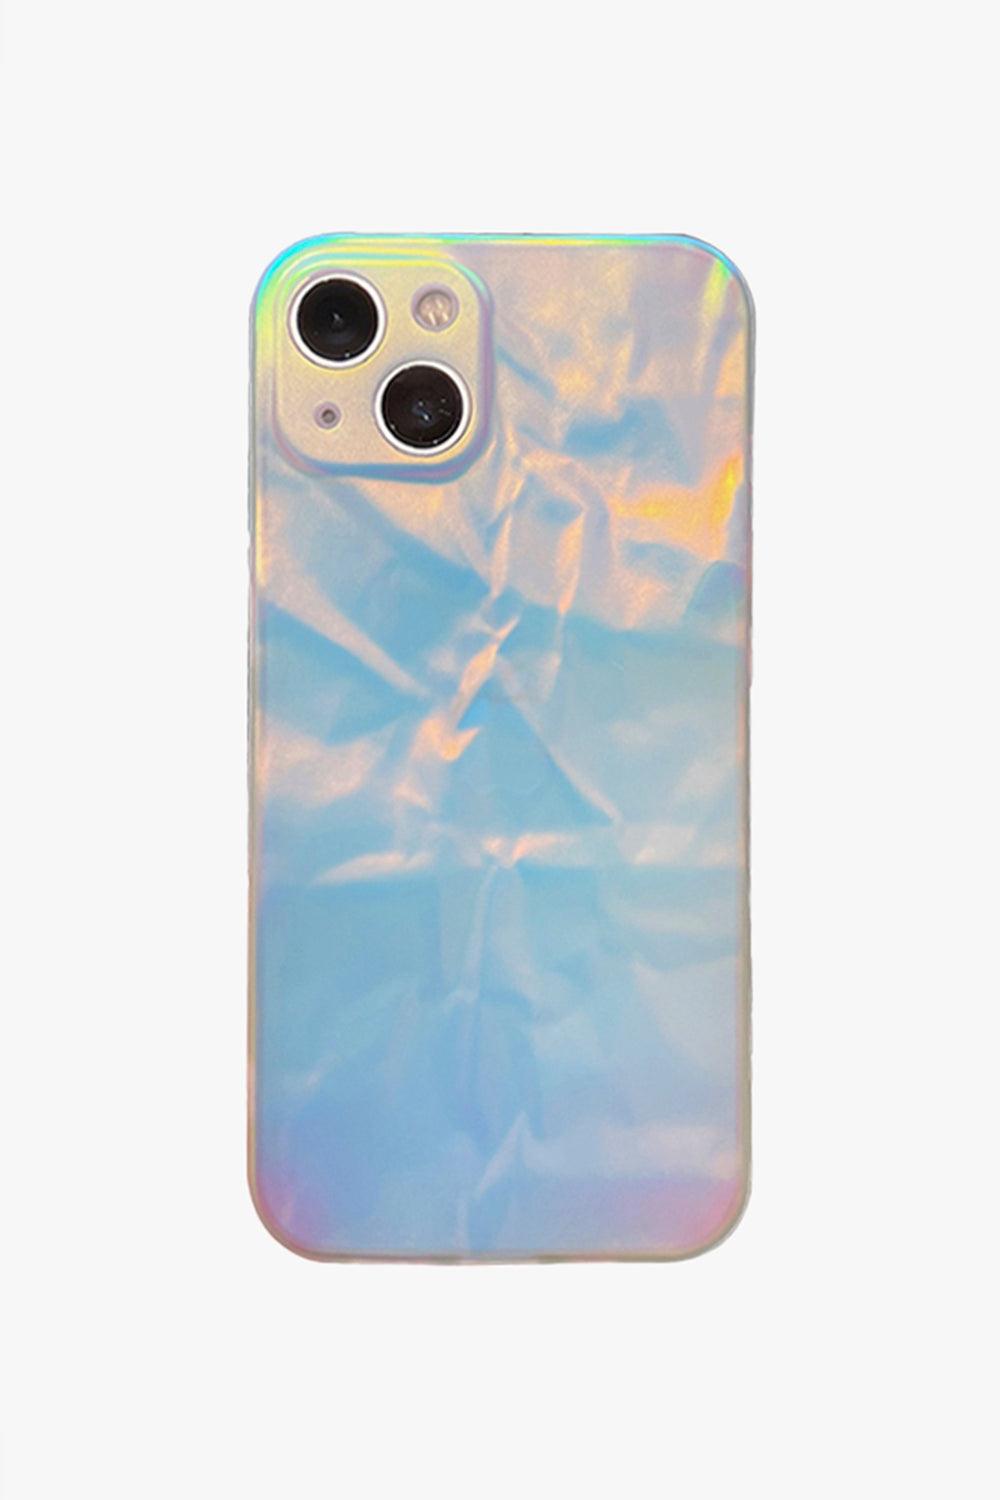 Holographic Foil Ethereal iPhone Case - Aesthetic Clothes Shop